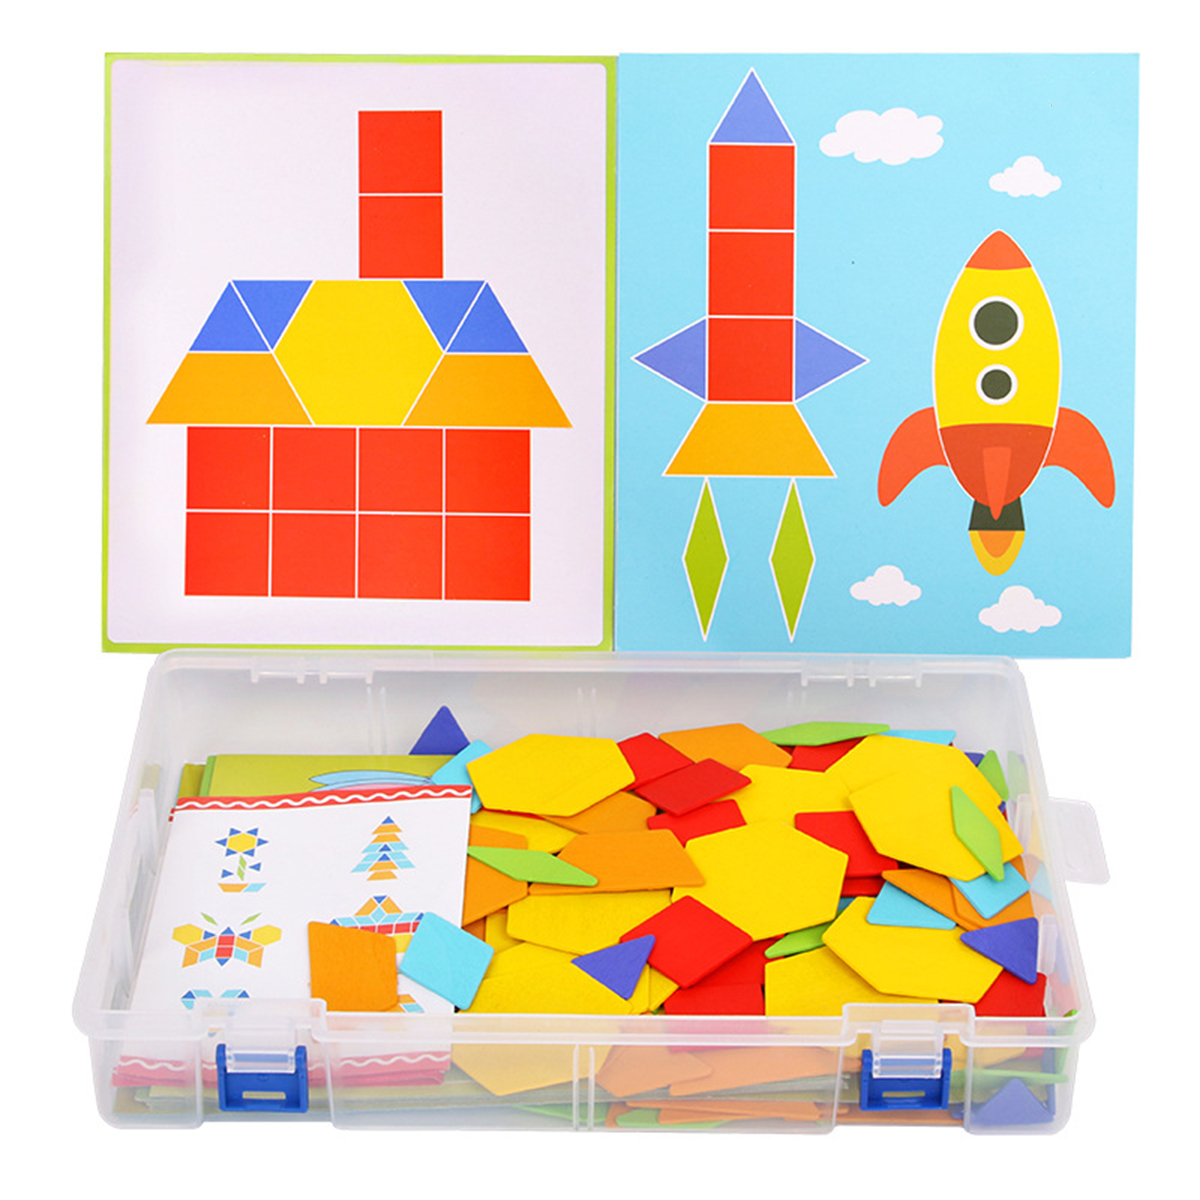 170PCS-Wooden-IQ-Game-Jigsaw-Early-Learning-Educational-Tangram-Puzzle-Kid-Toy-1607821-8